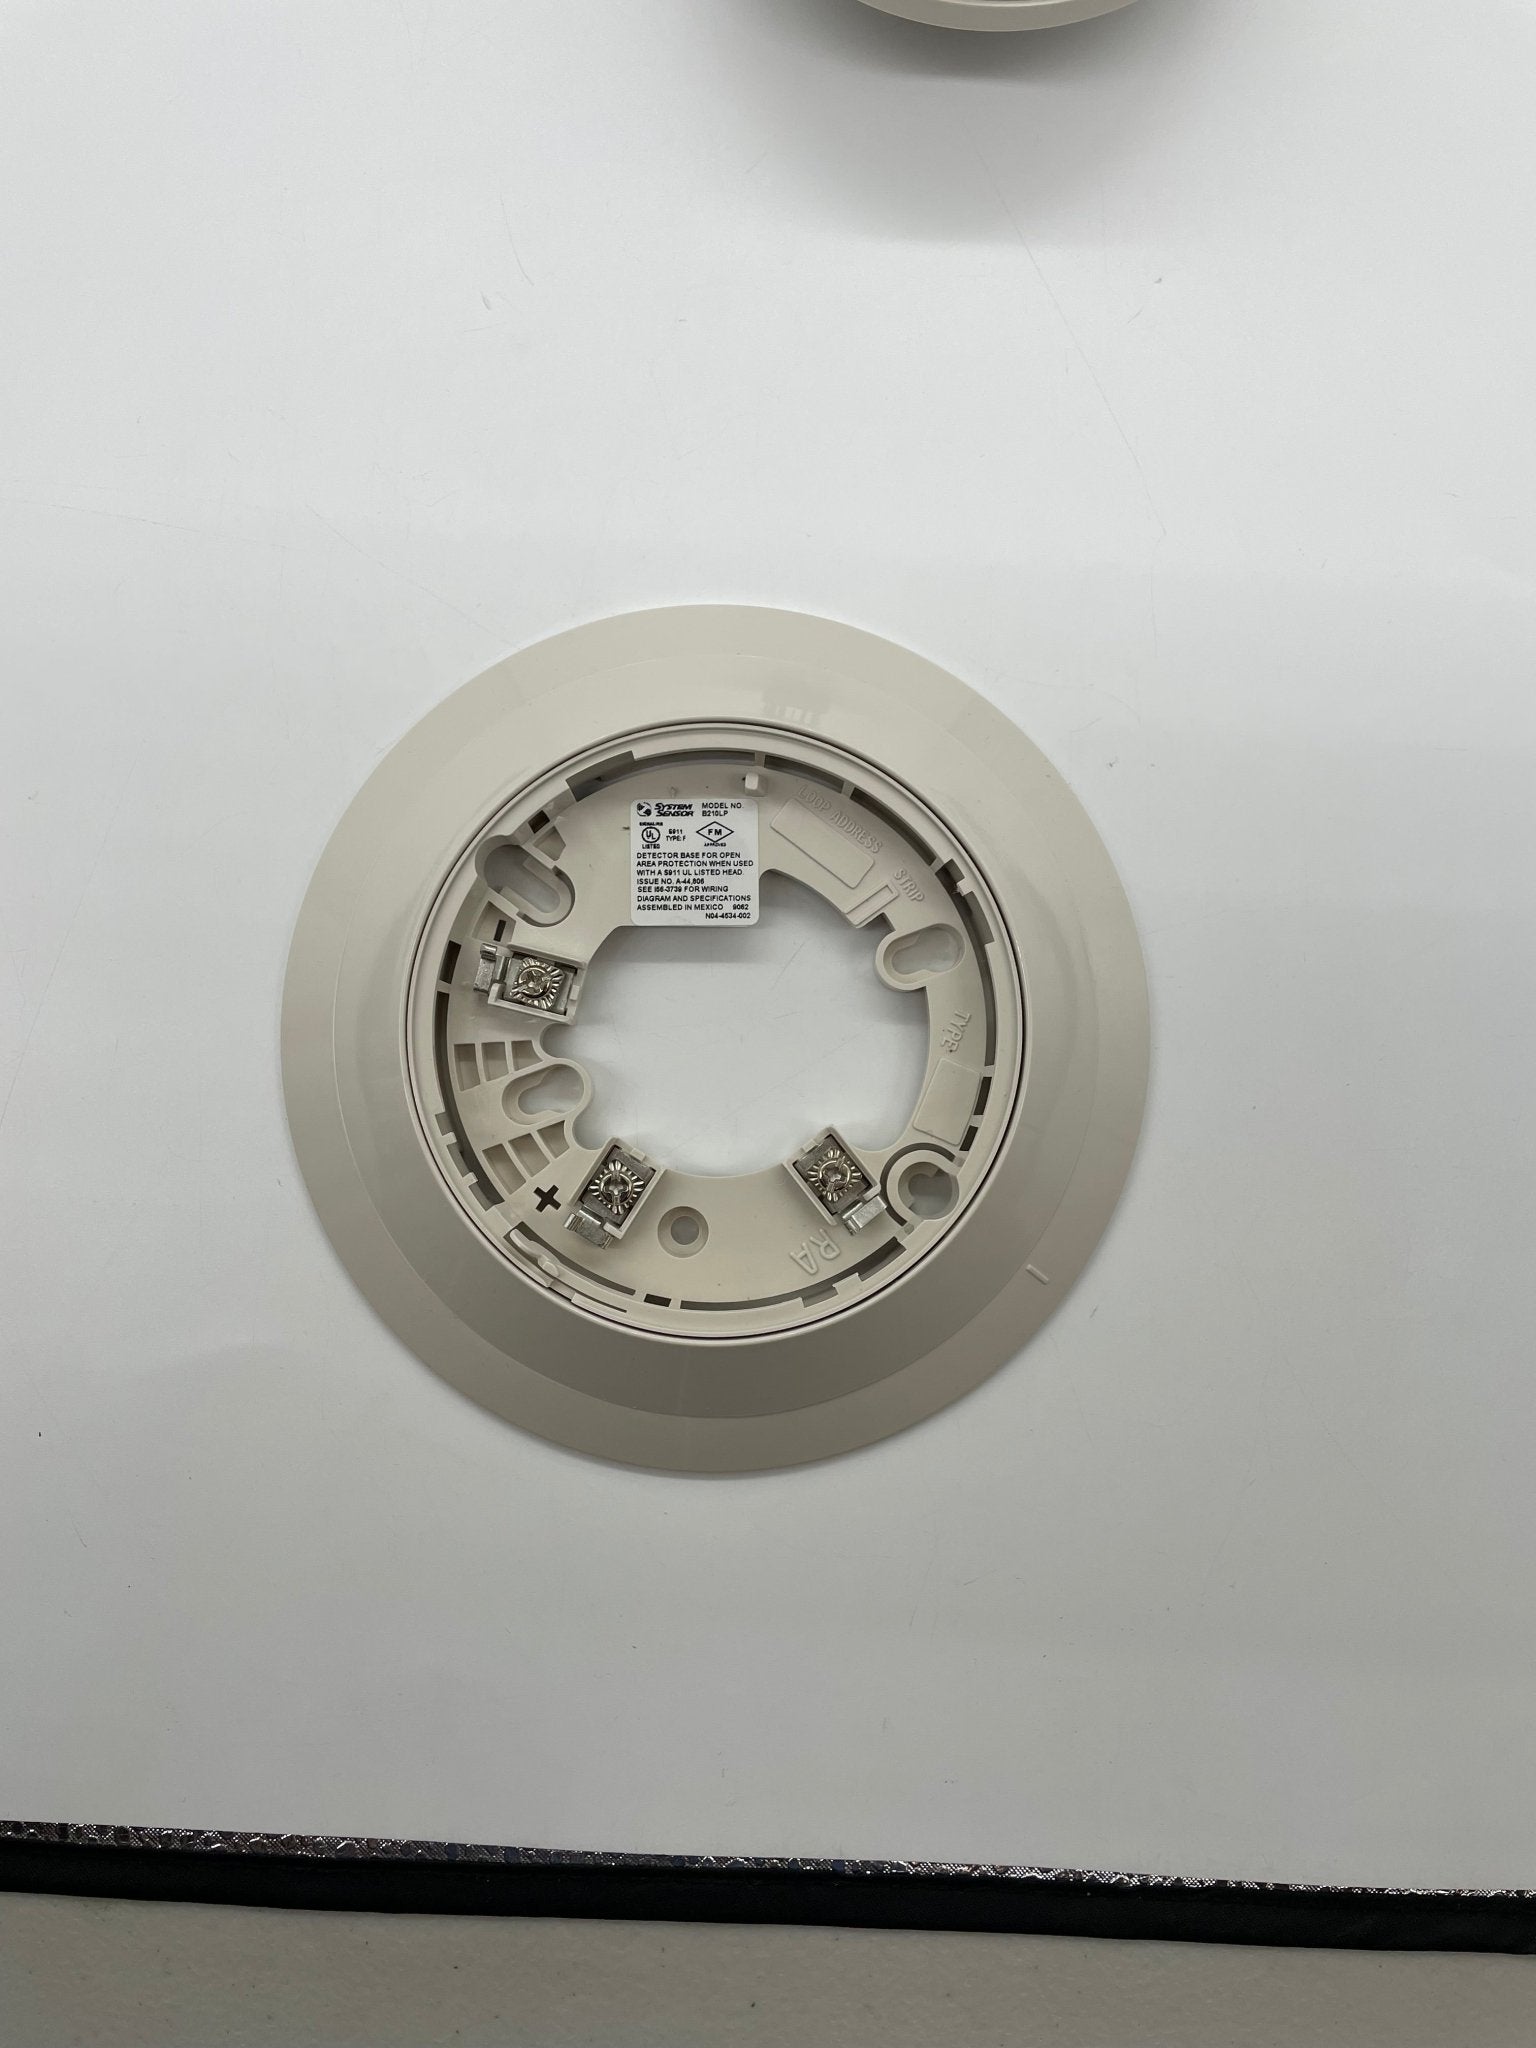 Firelite H355HT (Discontinued, Last Units in Stock) - The Fire Alarm Supplier